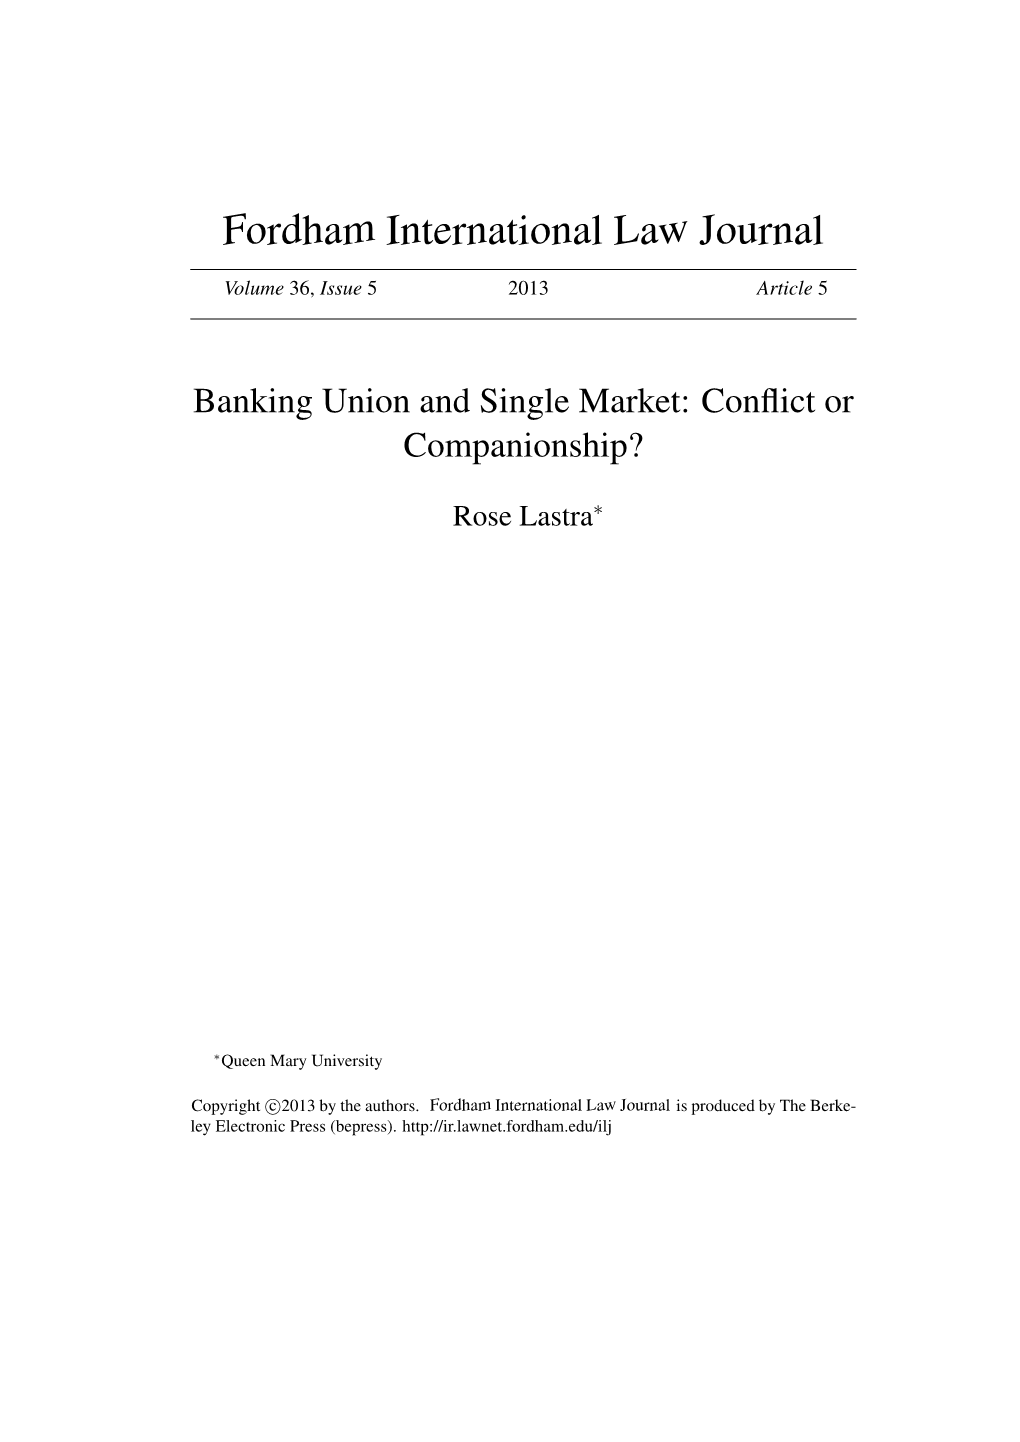 Banking Union and Single Market: Conflict Or Companionship?